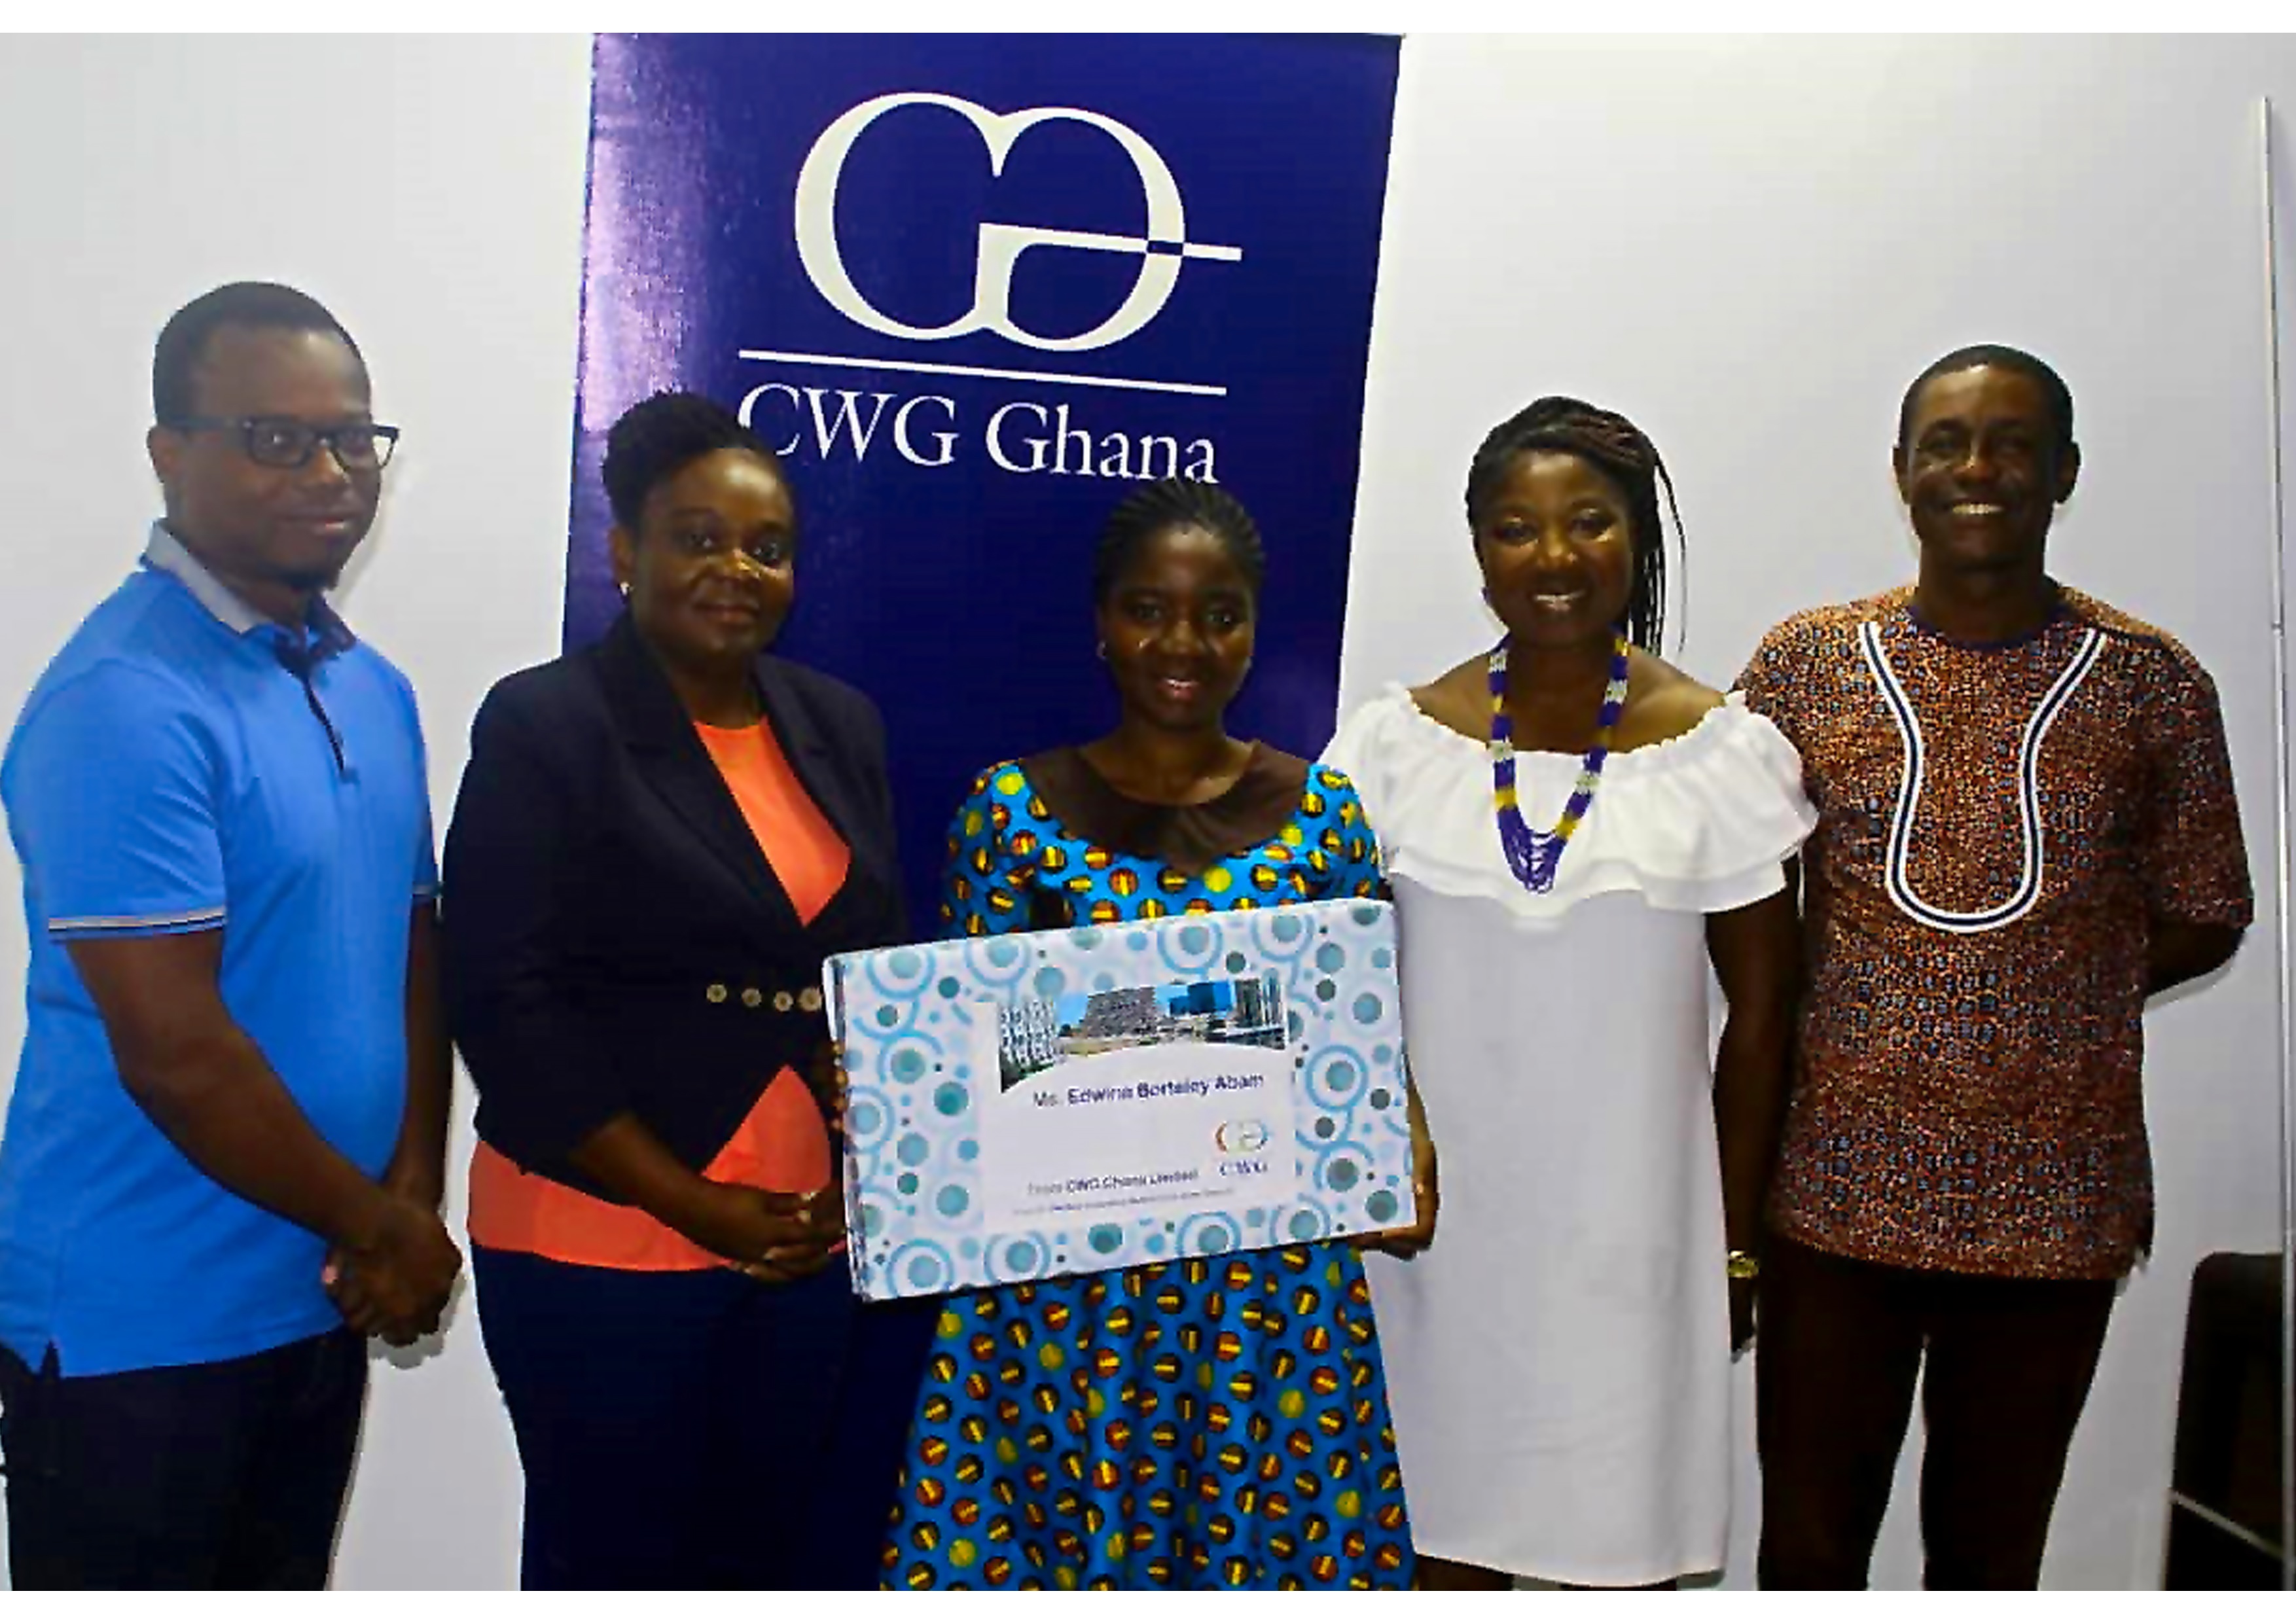 From left to right Oluwaseun Layade, Project Manager at CWG Ghana_ Harriet Yartey, Managing Director at CWG Ghana_ Edwina Borteley Abam_ Beatrice Adotey-Addey, mother_ and Robert Mawumor-Lewis, father